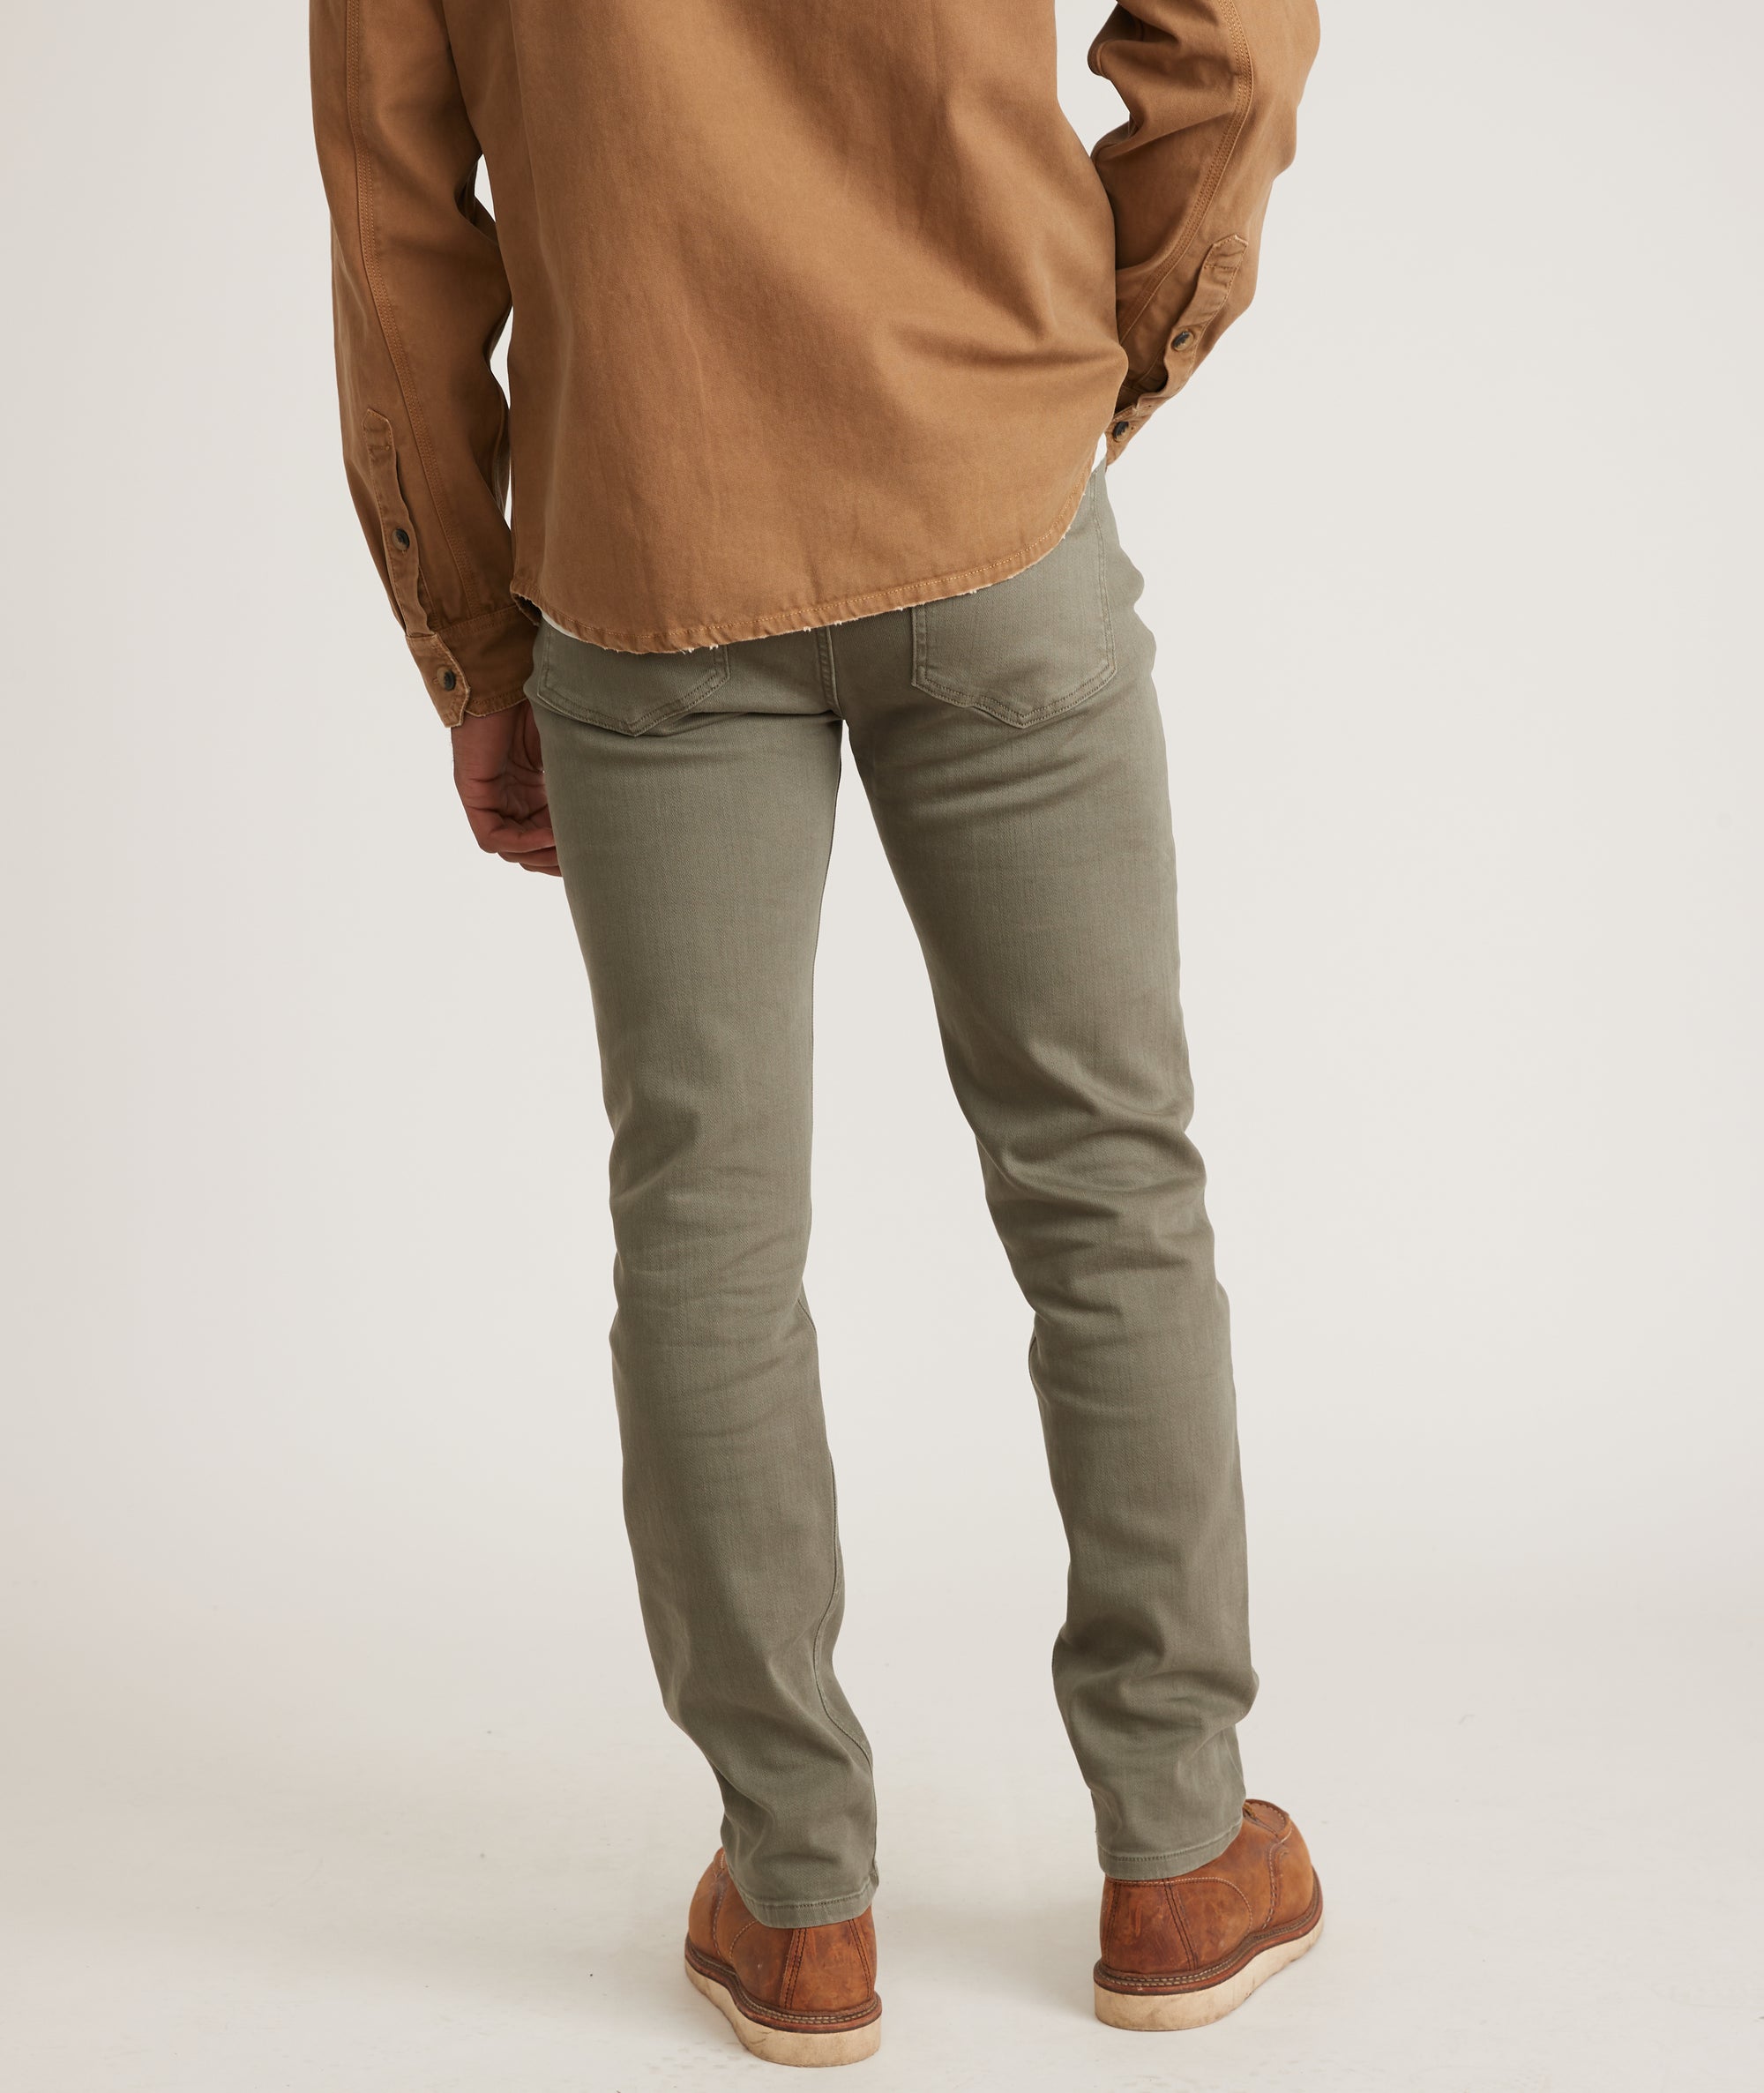 5 Pocket Pant Slim Fit – Olive in Layer Marine Faded